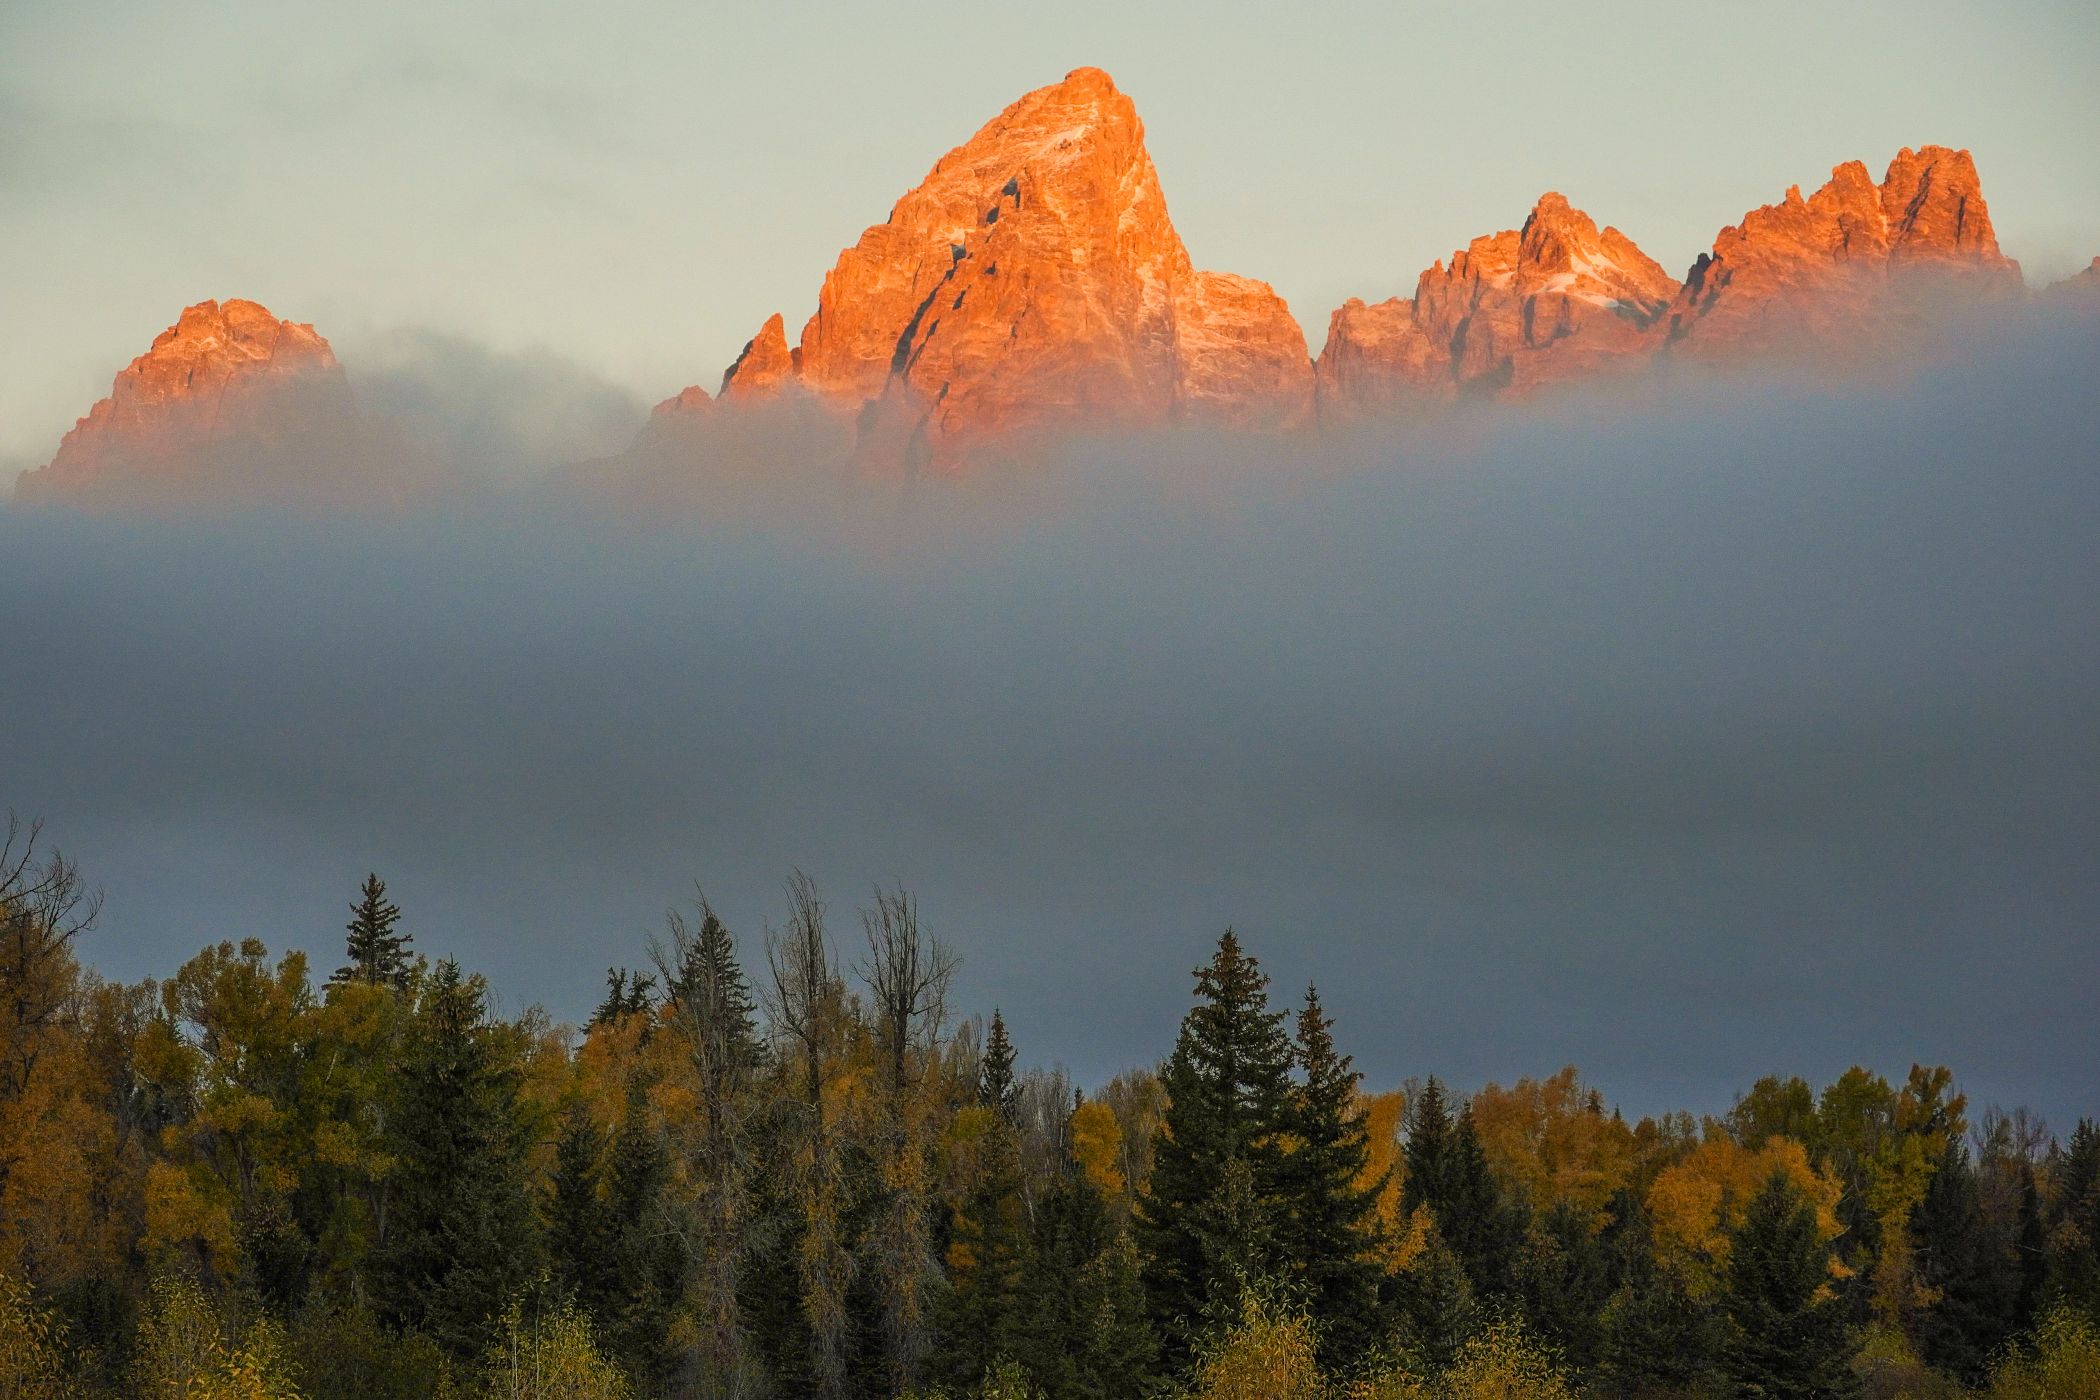 The Tetons glowing during golden hour